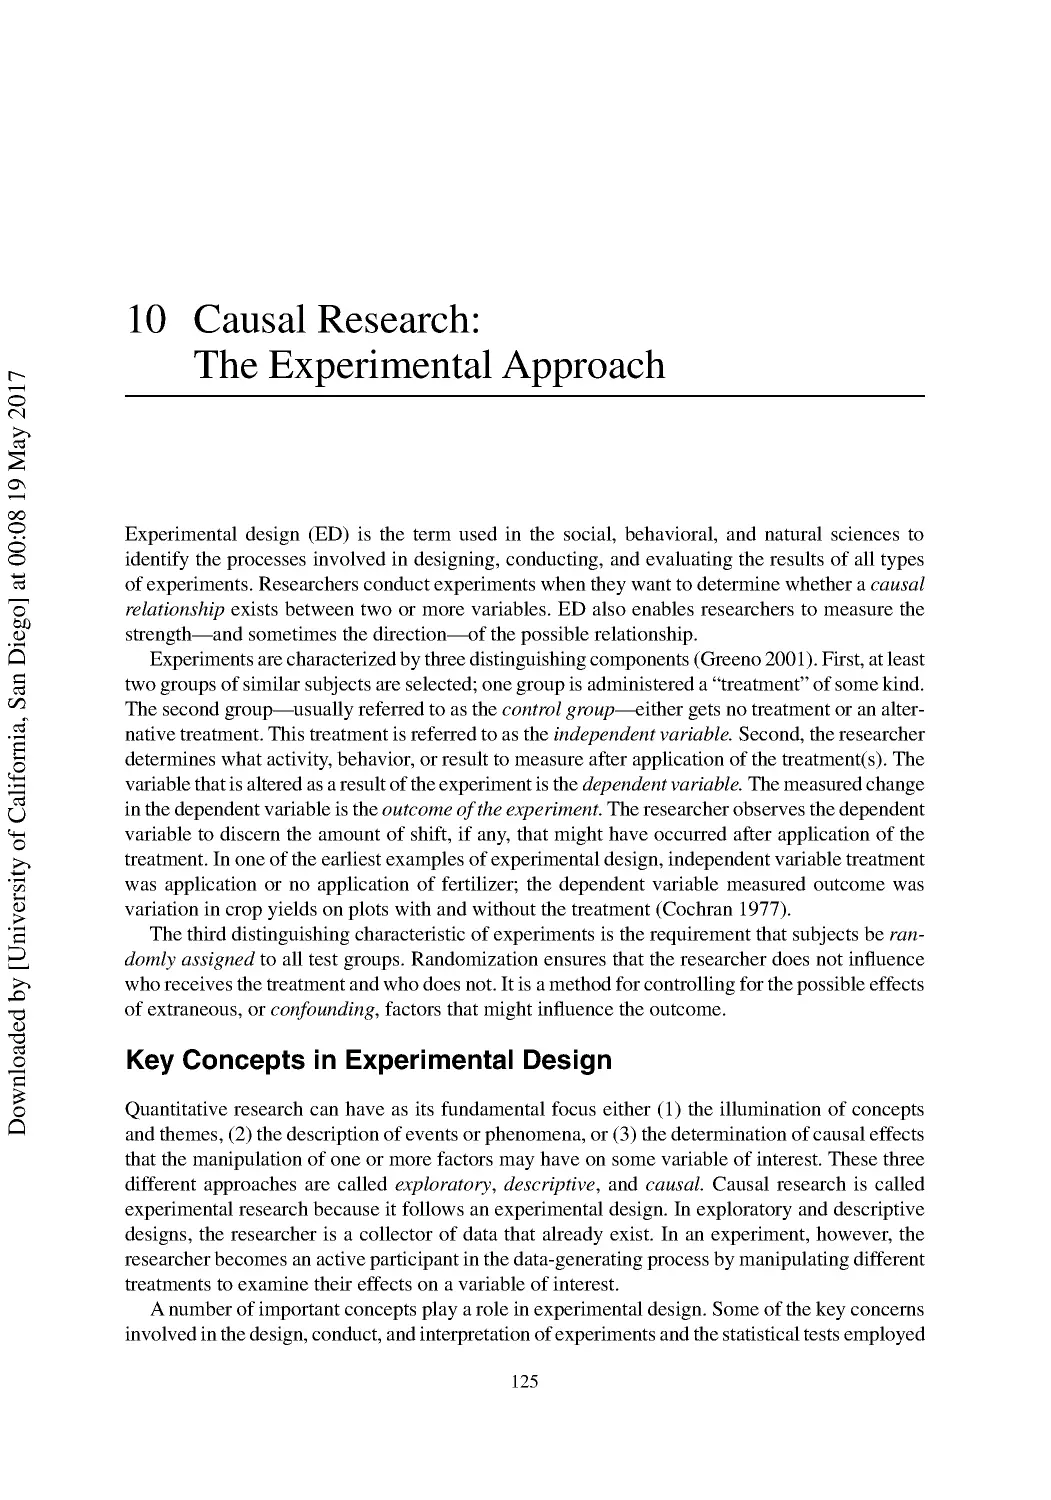 10 Causal Research: The Experimental Approach